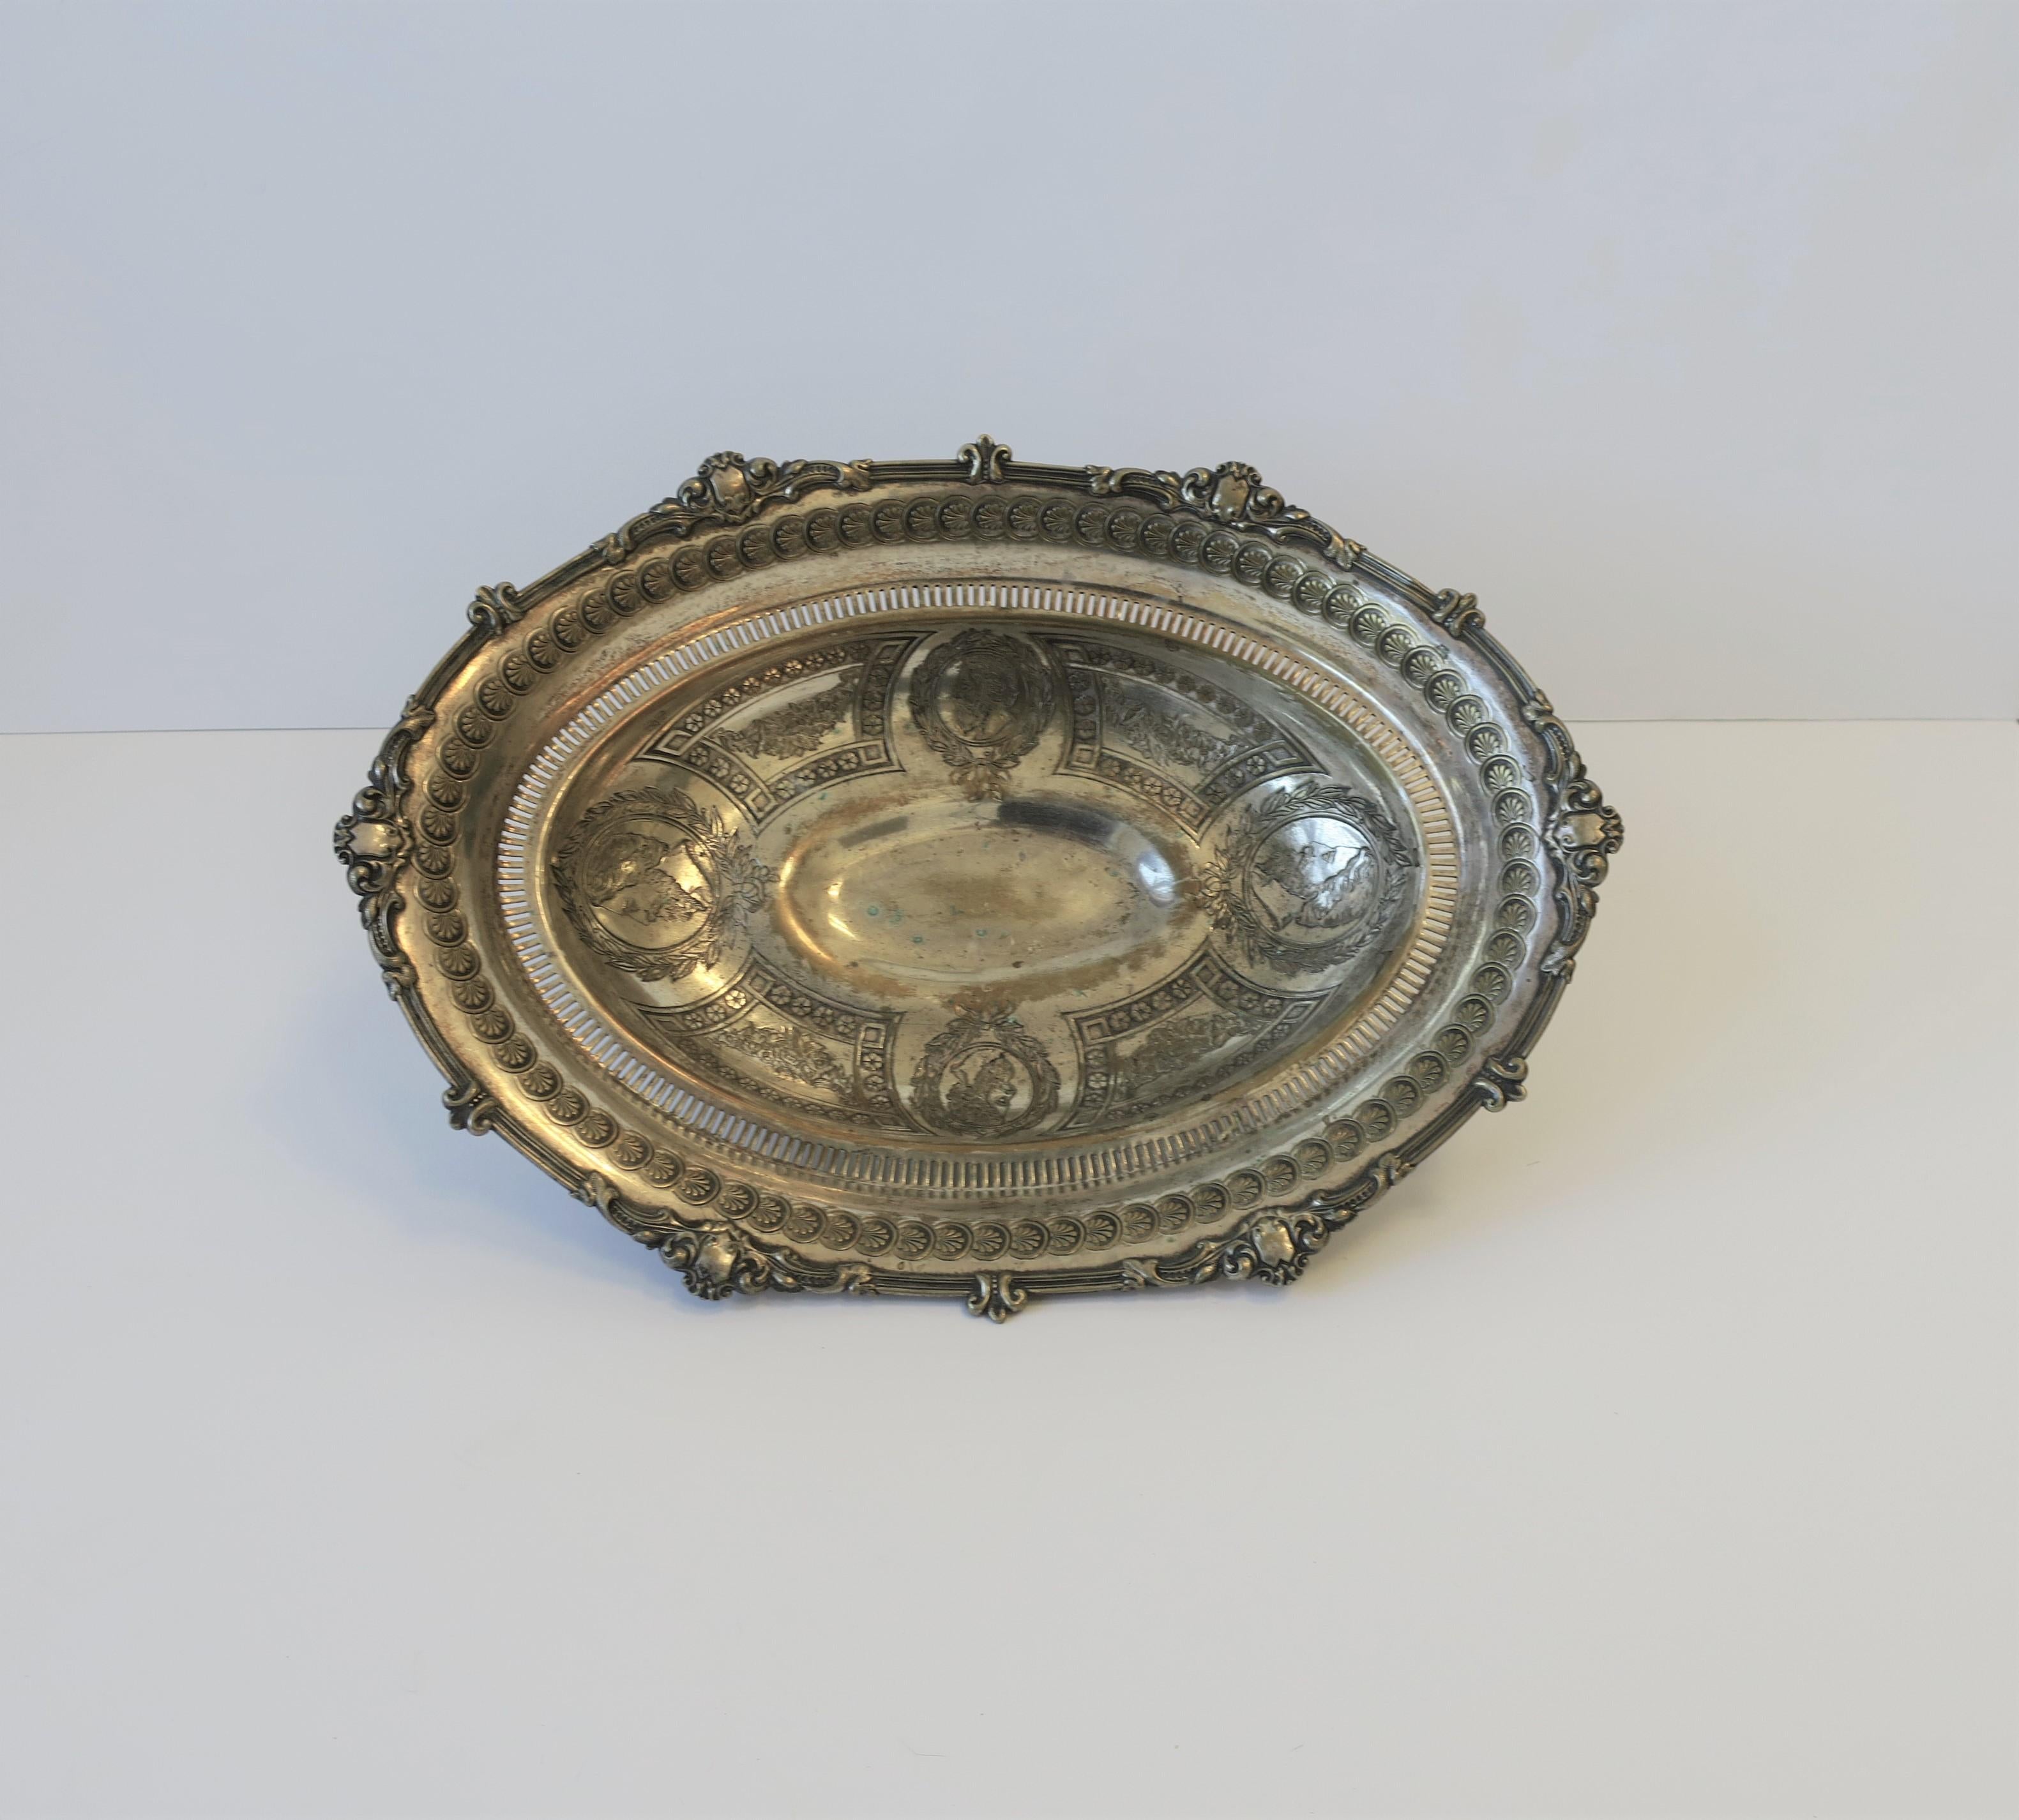 20th Century English Silver Footed Compote Bowl